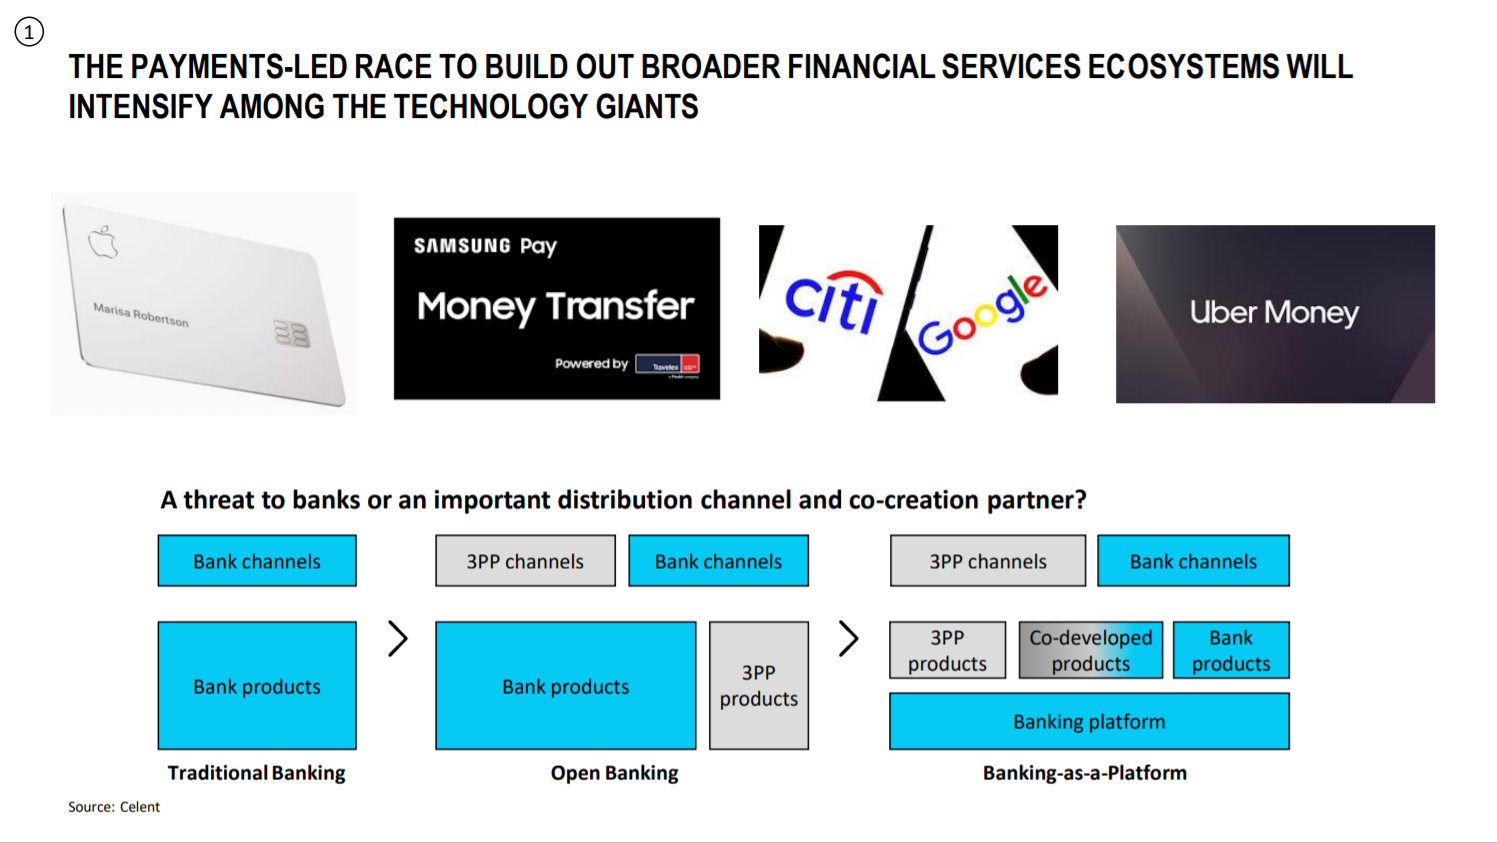 Broader Financial Services Ecosystems